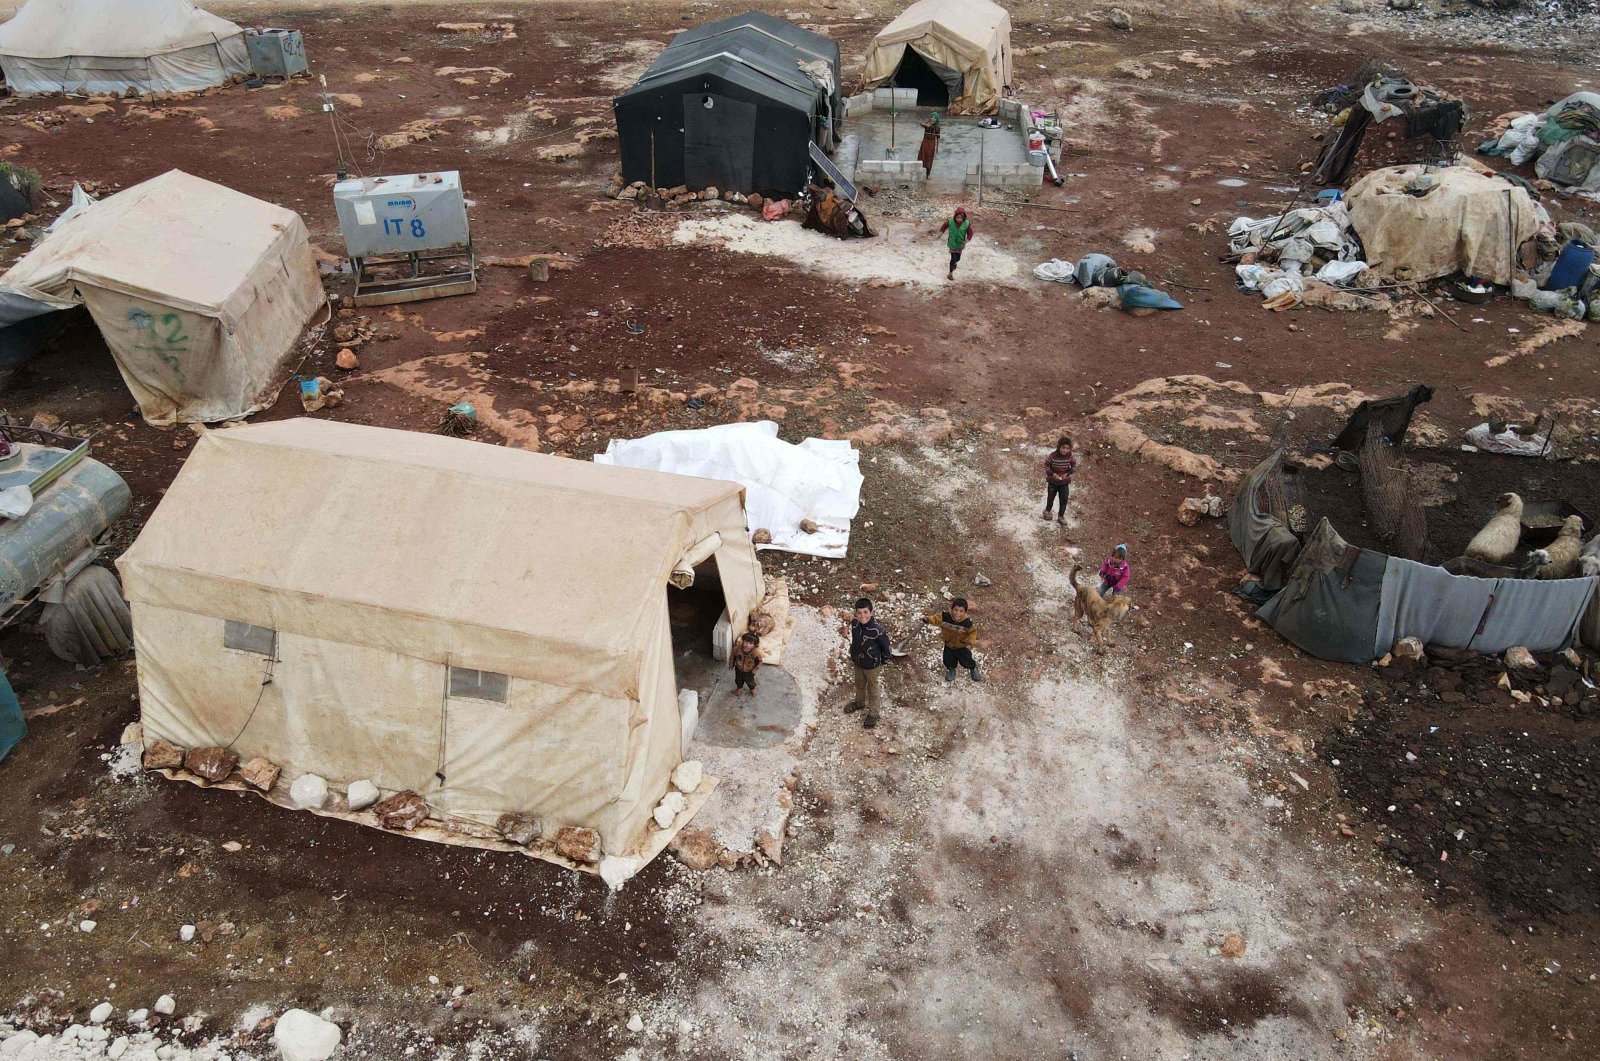 This aerial view shows children in the Bardaqli camp for displaced people in the town of Dana in the northwestern Idlib province, Syria, on Nov. 20, 2021. (AFP Photo)